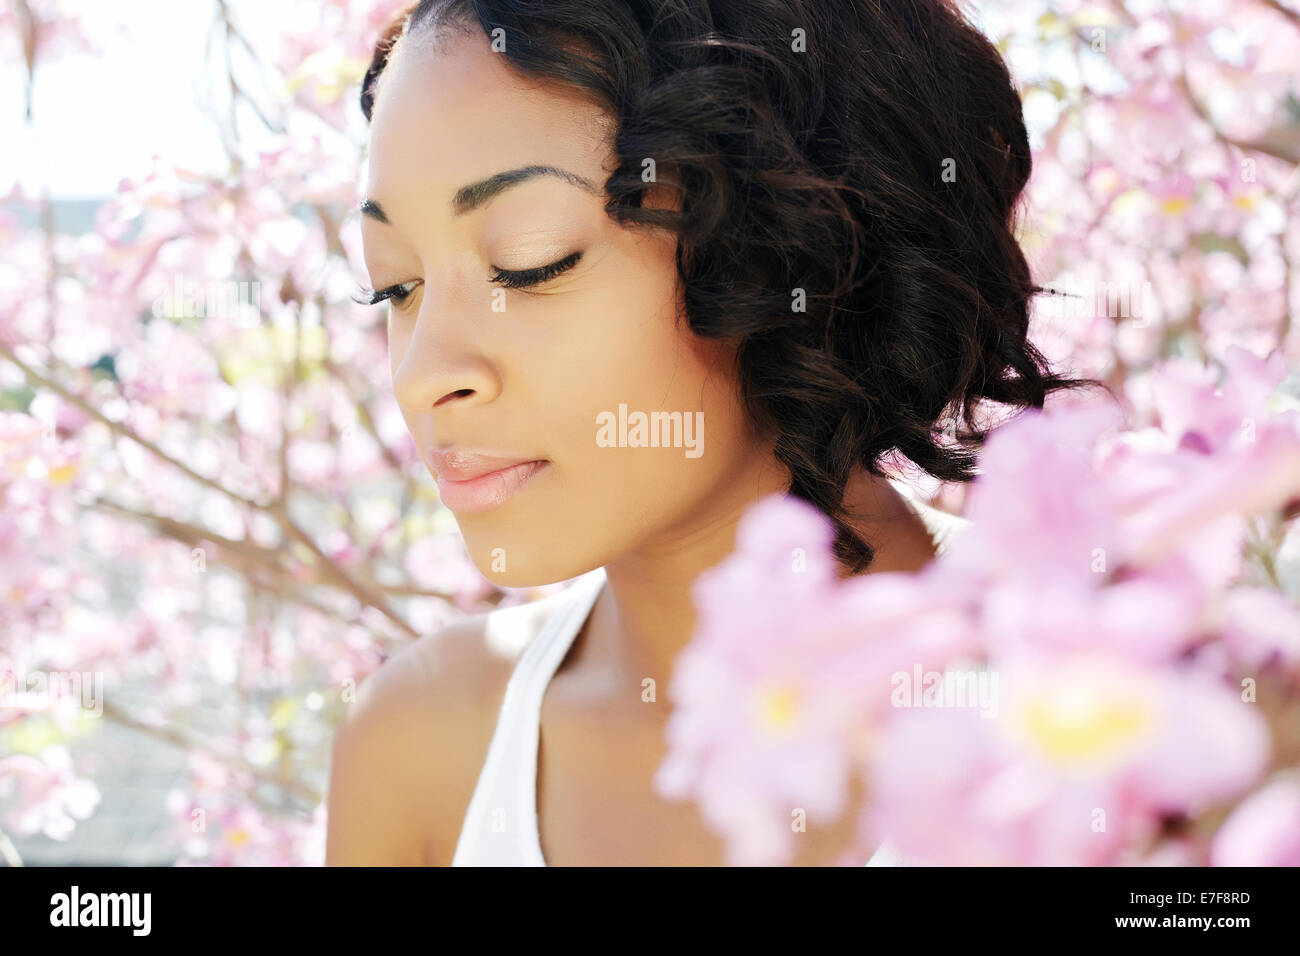 African American woman standing by flowering tree Stock Photo